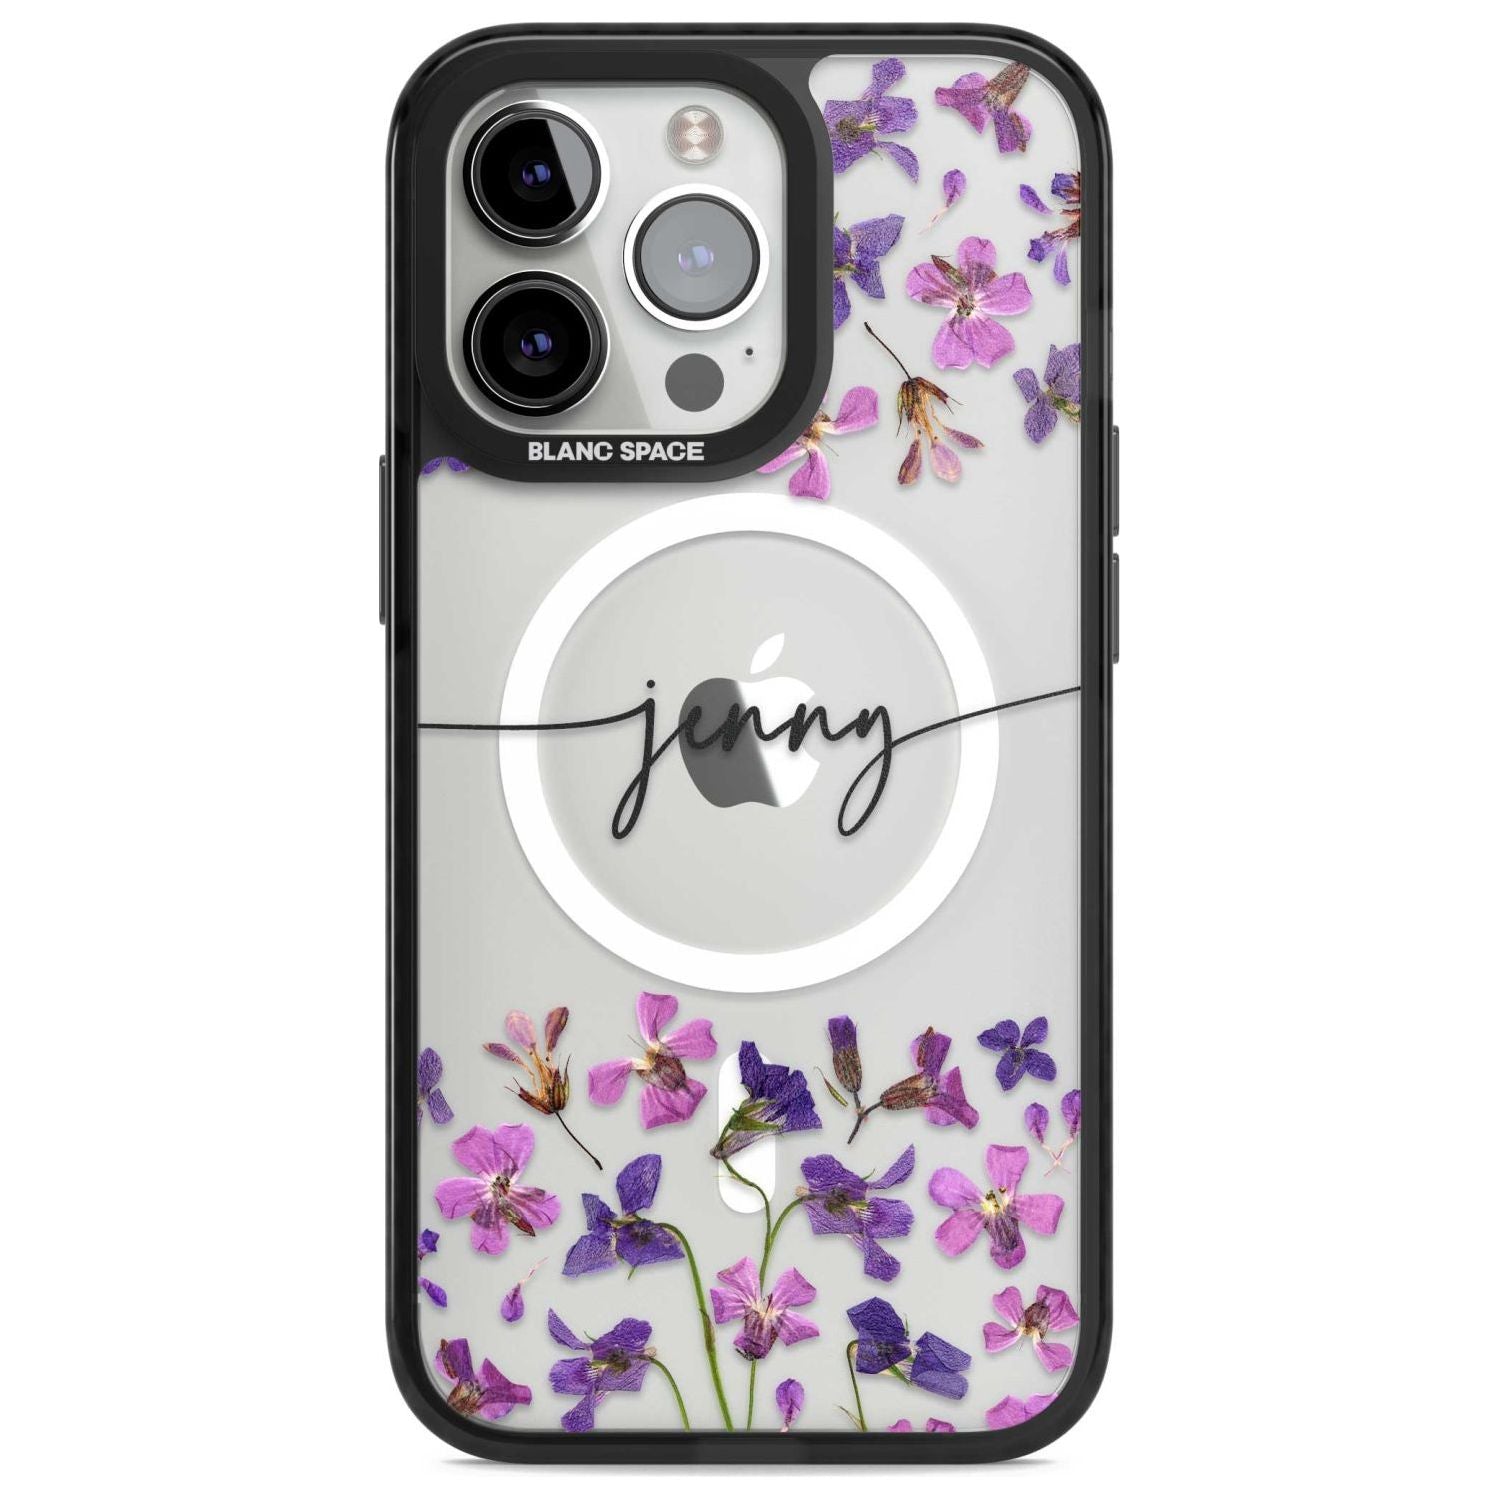 Personalised Purple Violets Custom Phone Case iPhone 15 Pro Max / Magsafe Black Impact Case,iPhone 15 Pro / Magsafe Black Impact Case,iPhone 14 Pro Max / Magsafe Black Impact Case,iPhone 14 Pro / Magsafe Black Impact Case,iPhone 13 Pro / Magsafe Black Impact Case Blanc Space